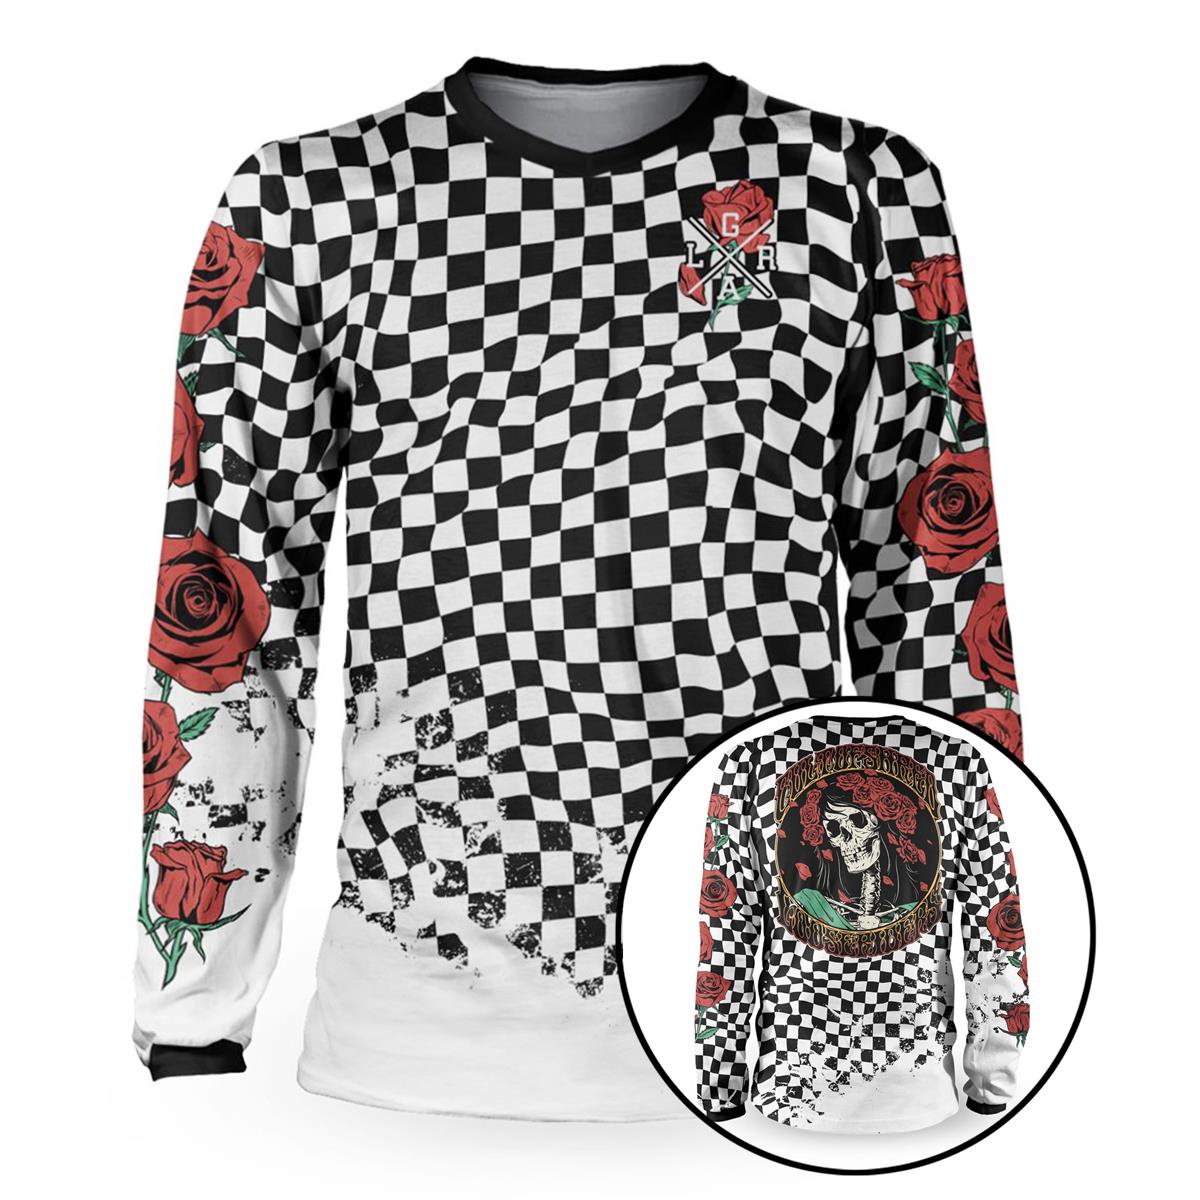 Loose Riders Downhill Jersey Long Sleeve G-Shred Check Black/White/Red